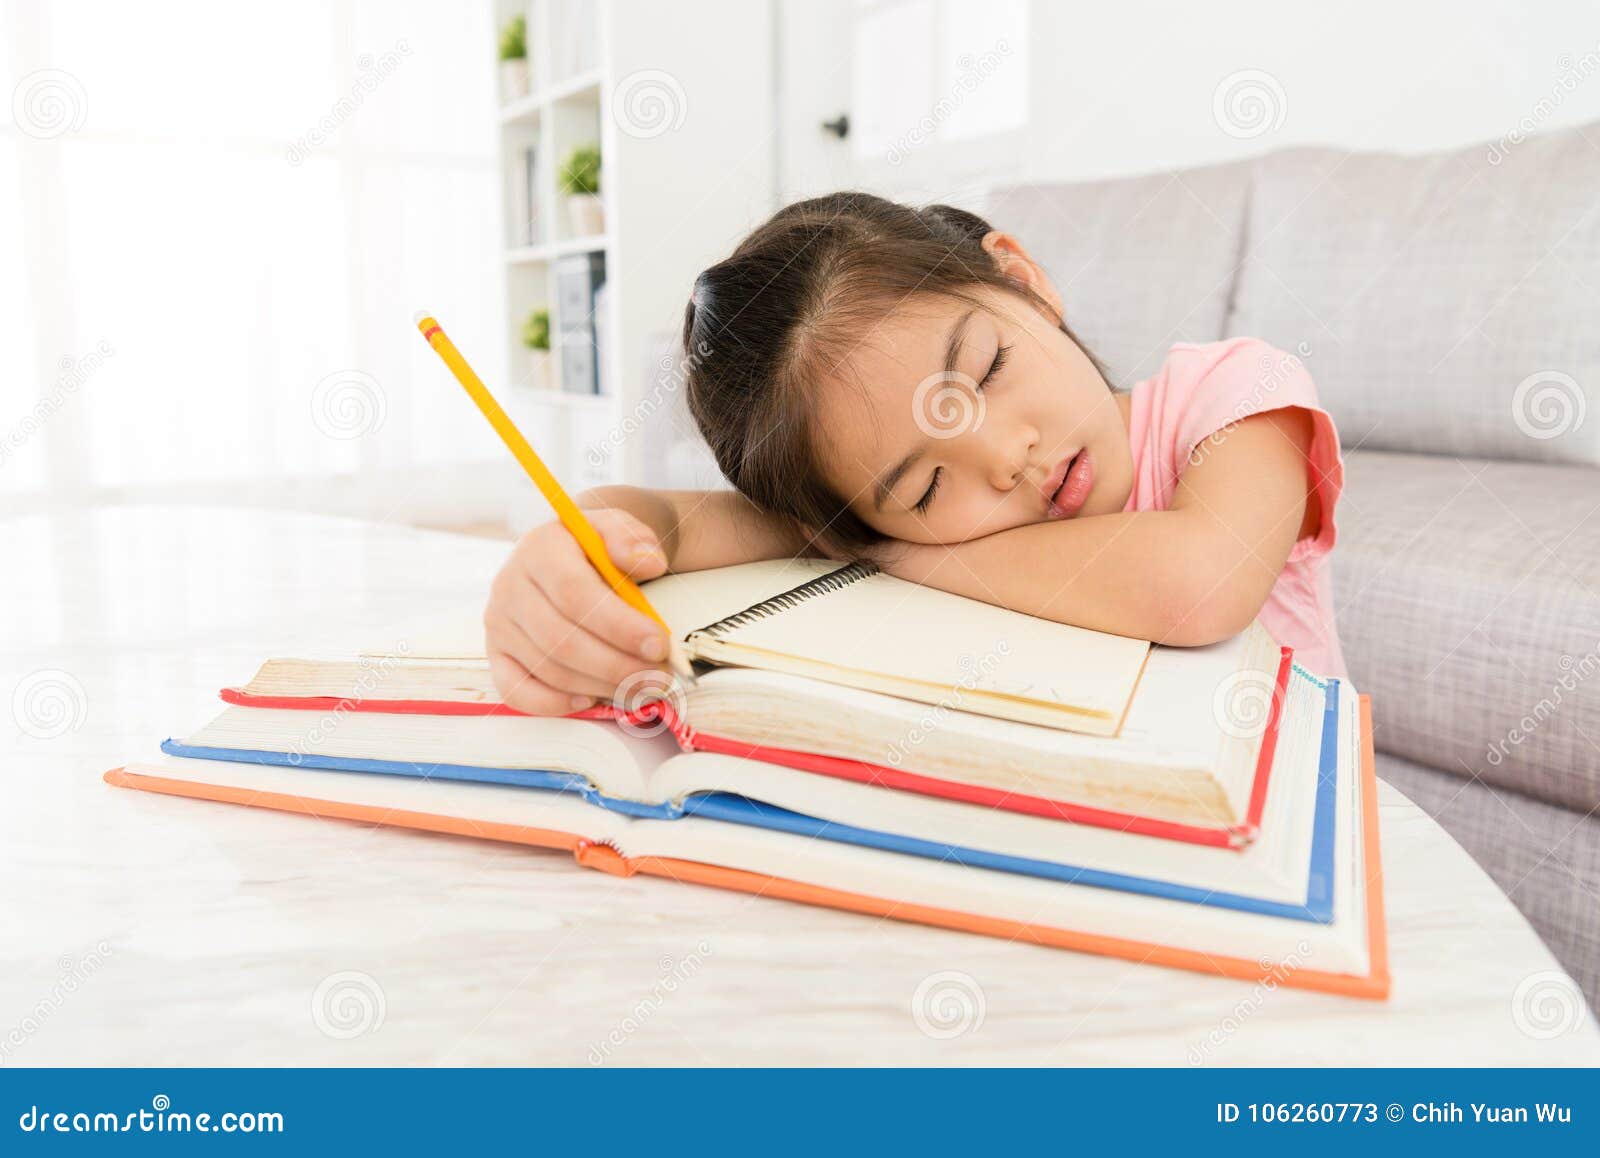 child keeps lying about homework